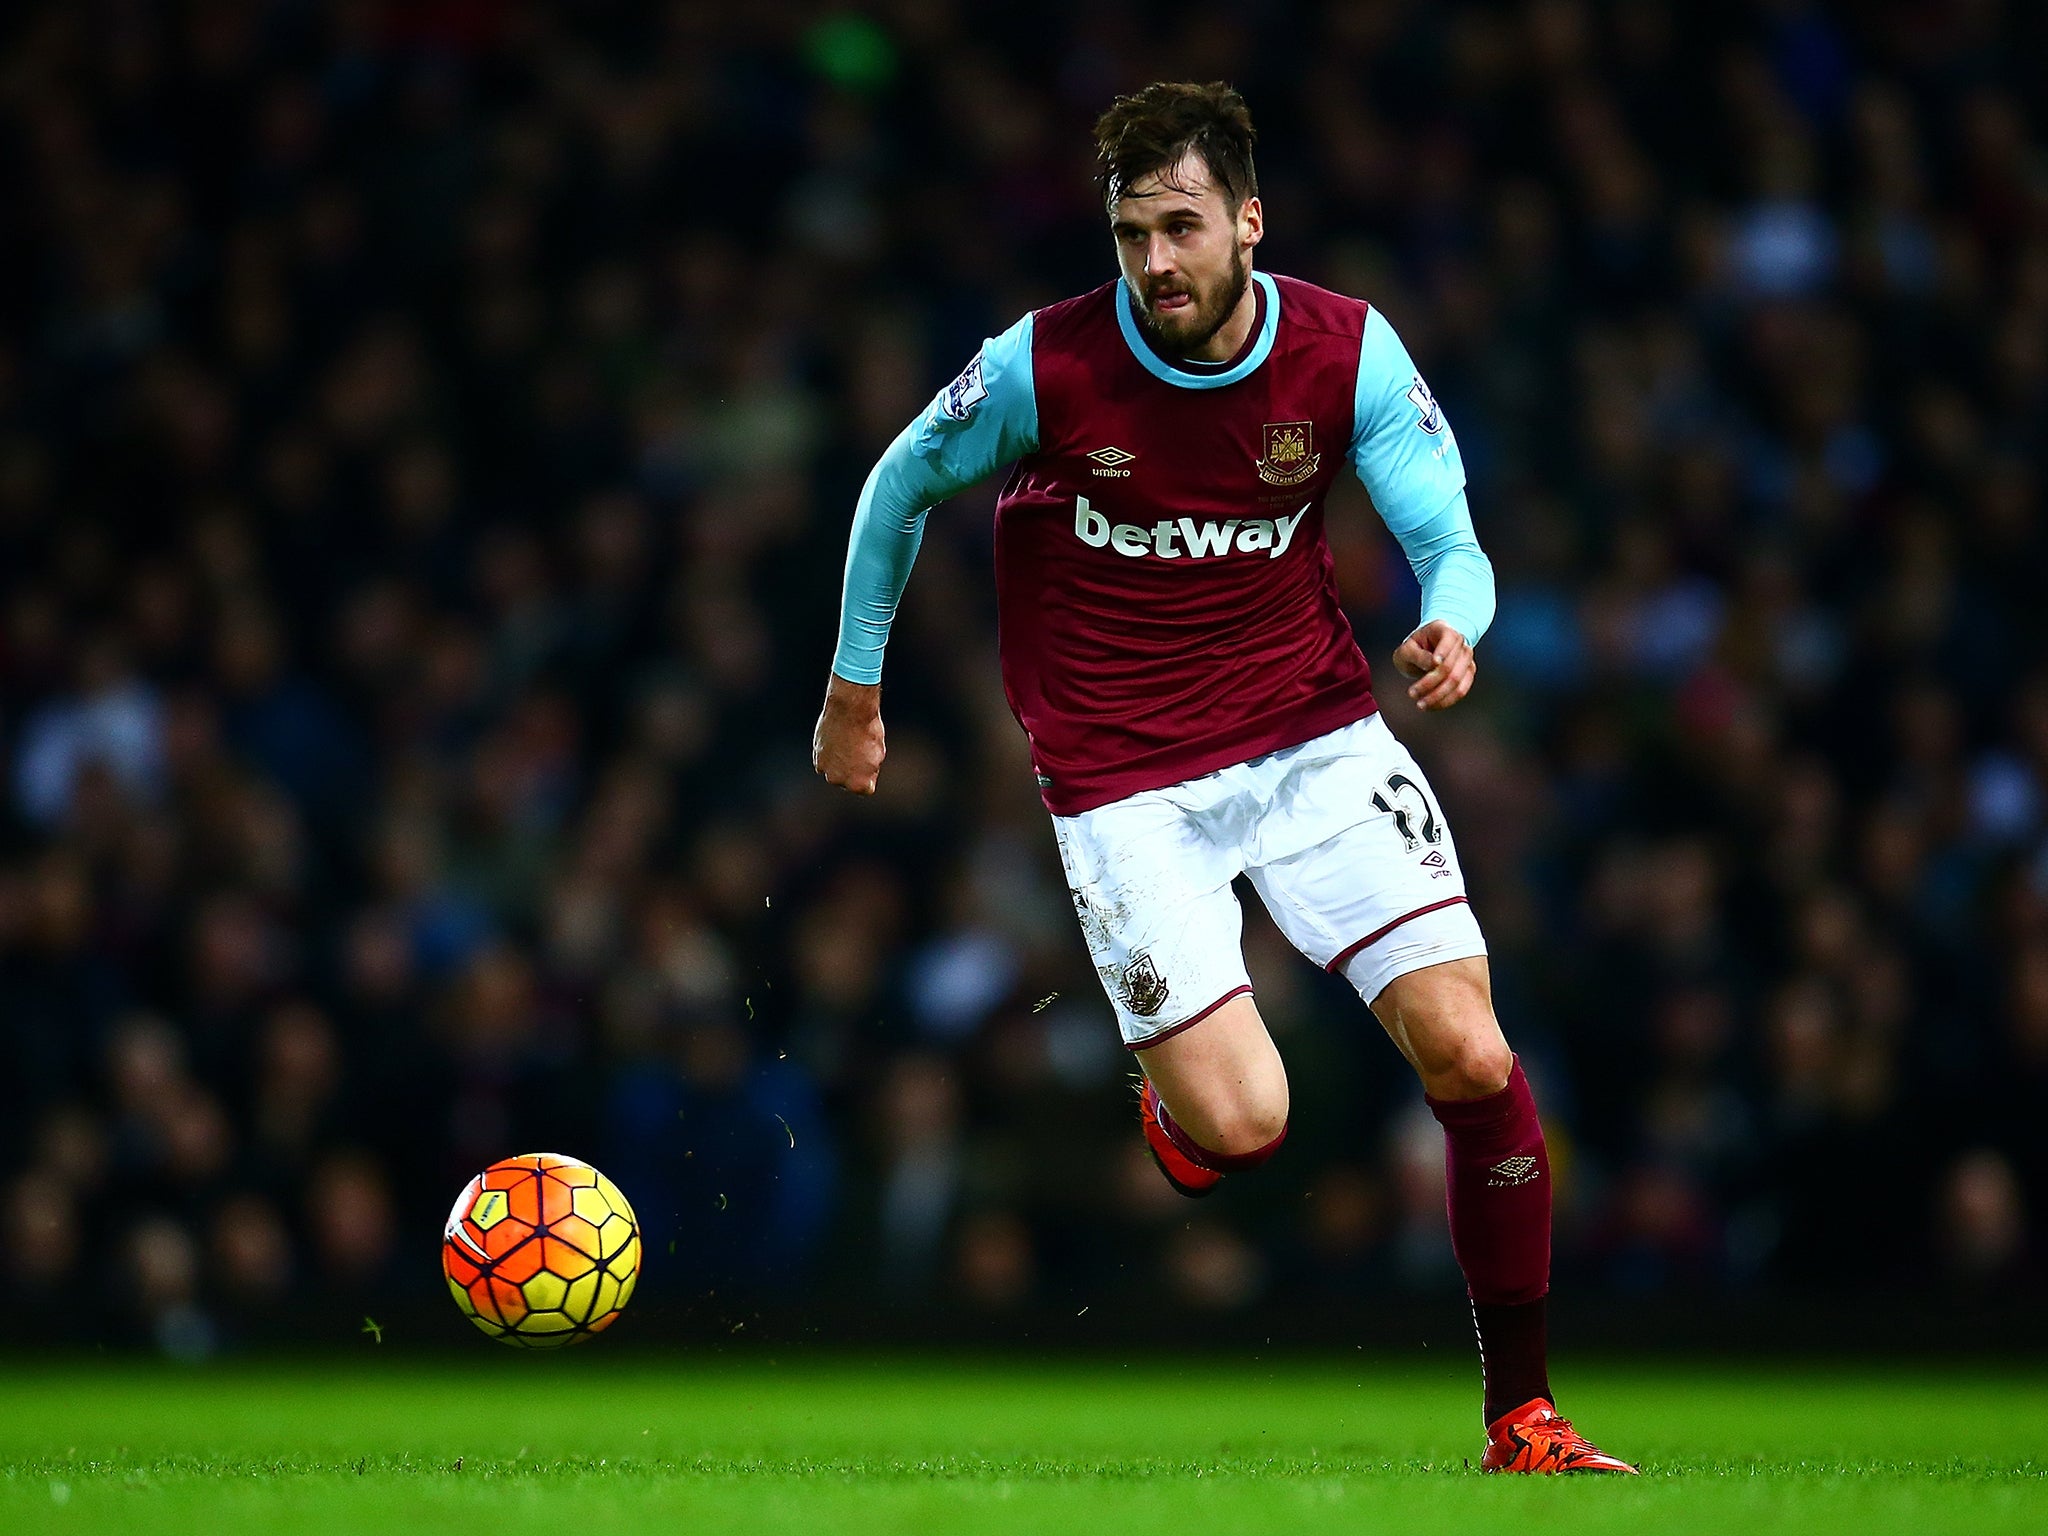 Jenkinson played under Palace boss Sam Allardyce during a loan spell at West Ham